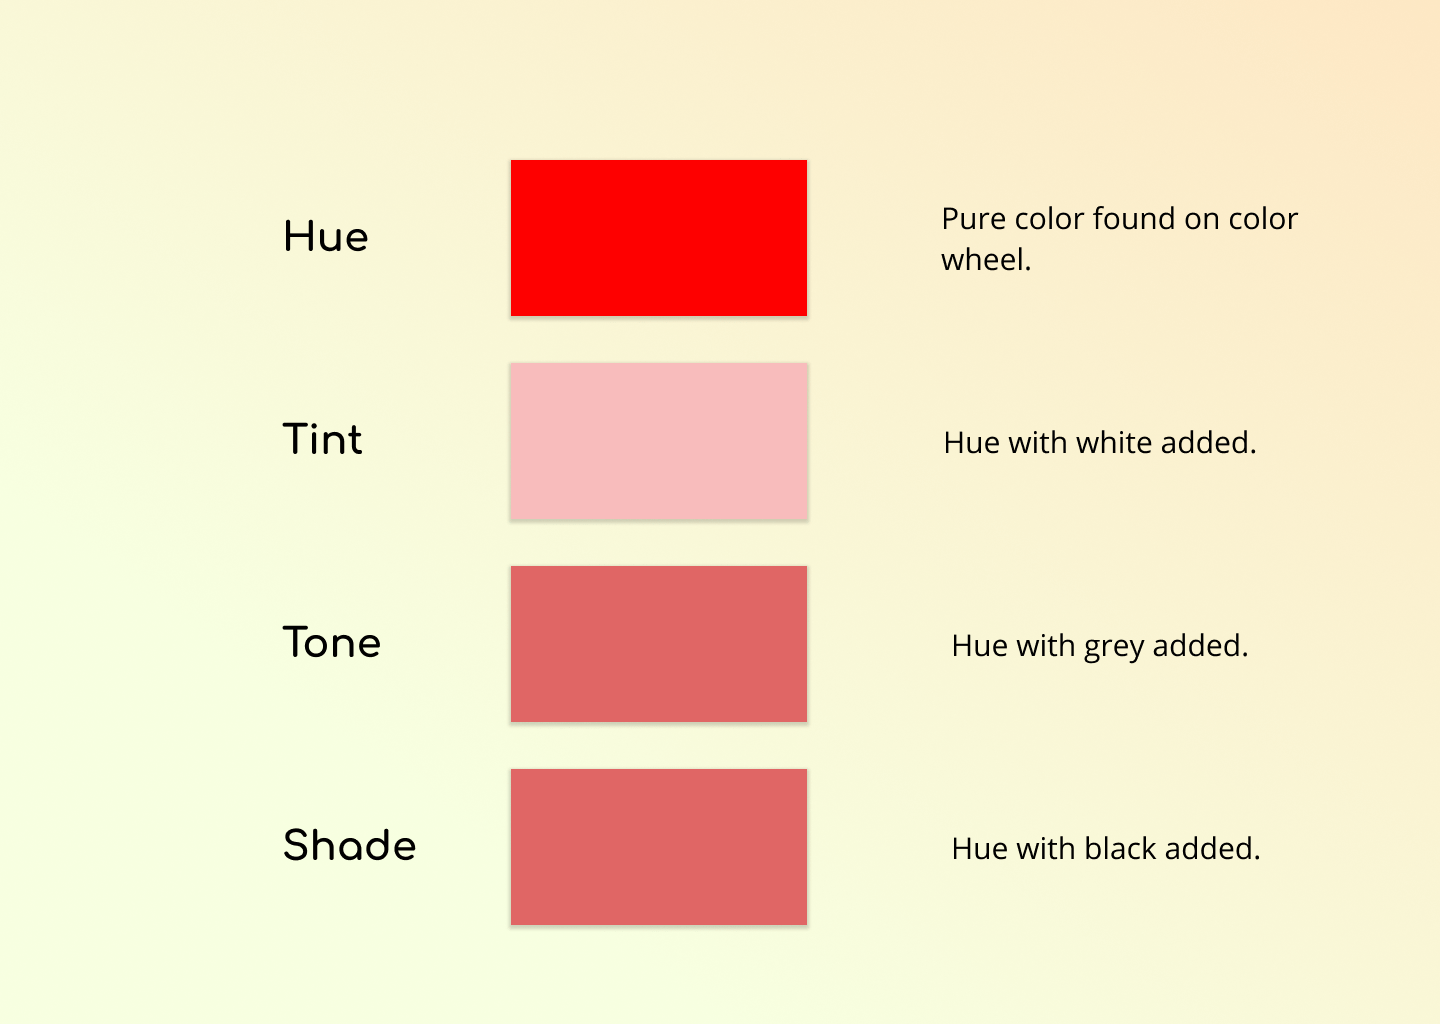 Illustration showing the effects of Hue, Tint, Tone, and Shade on red rectangles. Each rectangle is a slightly different shade of red where tint adds white, tone adds gray and shade adds black.